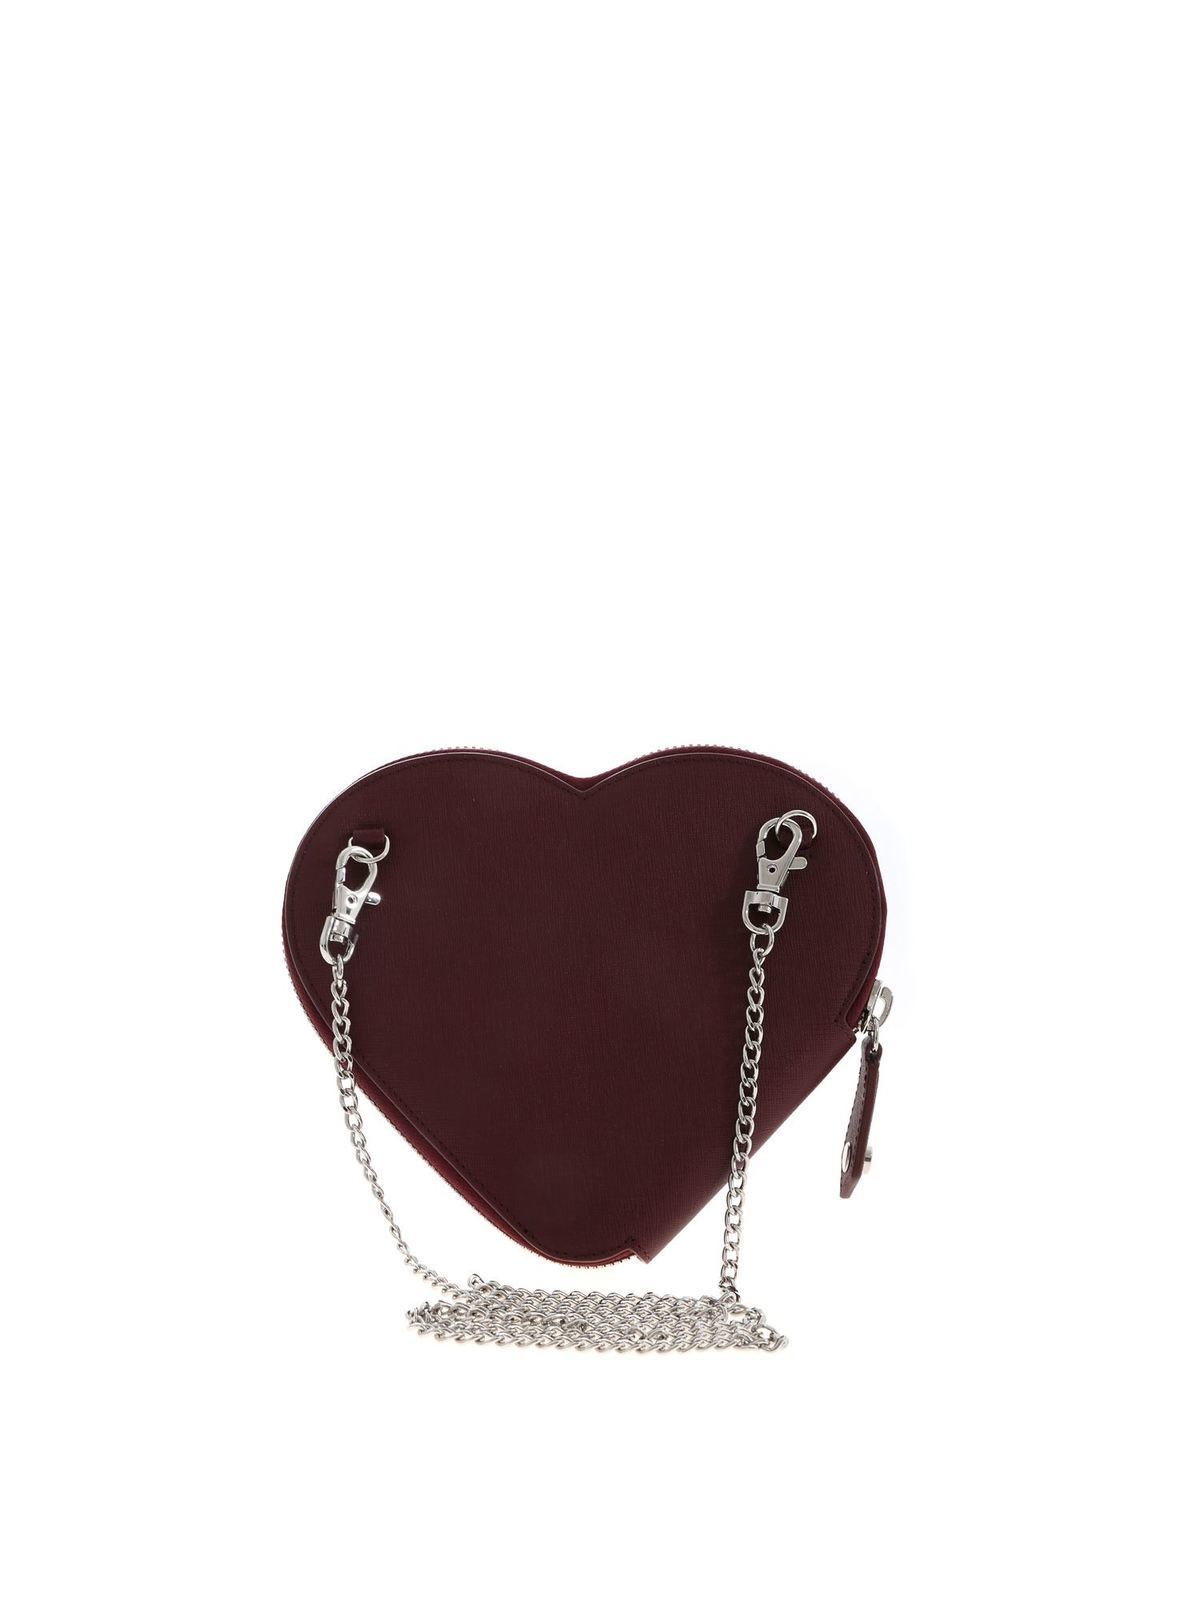 Vivienne Westwood red heart bag FREE WORLDWIDE SHIPPING - Bags and